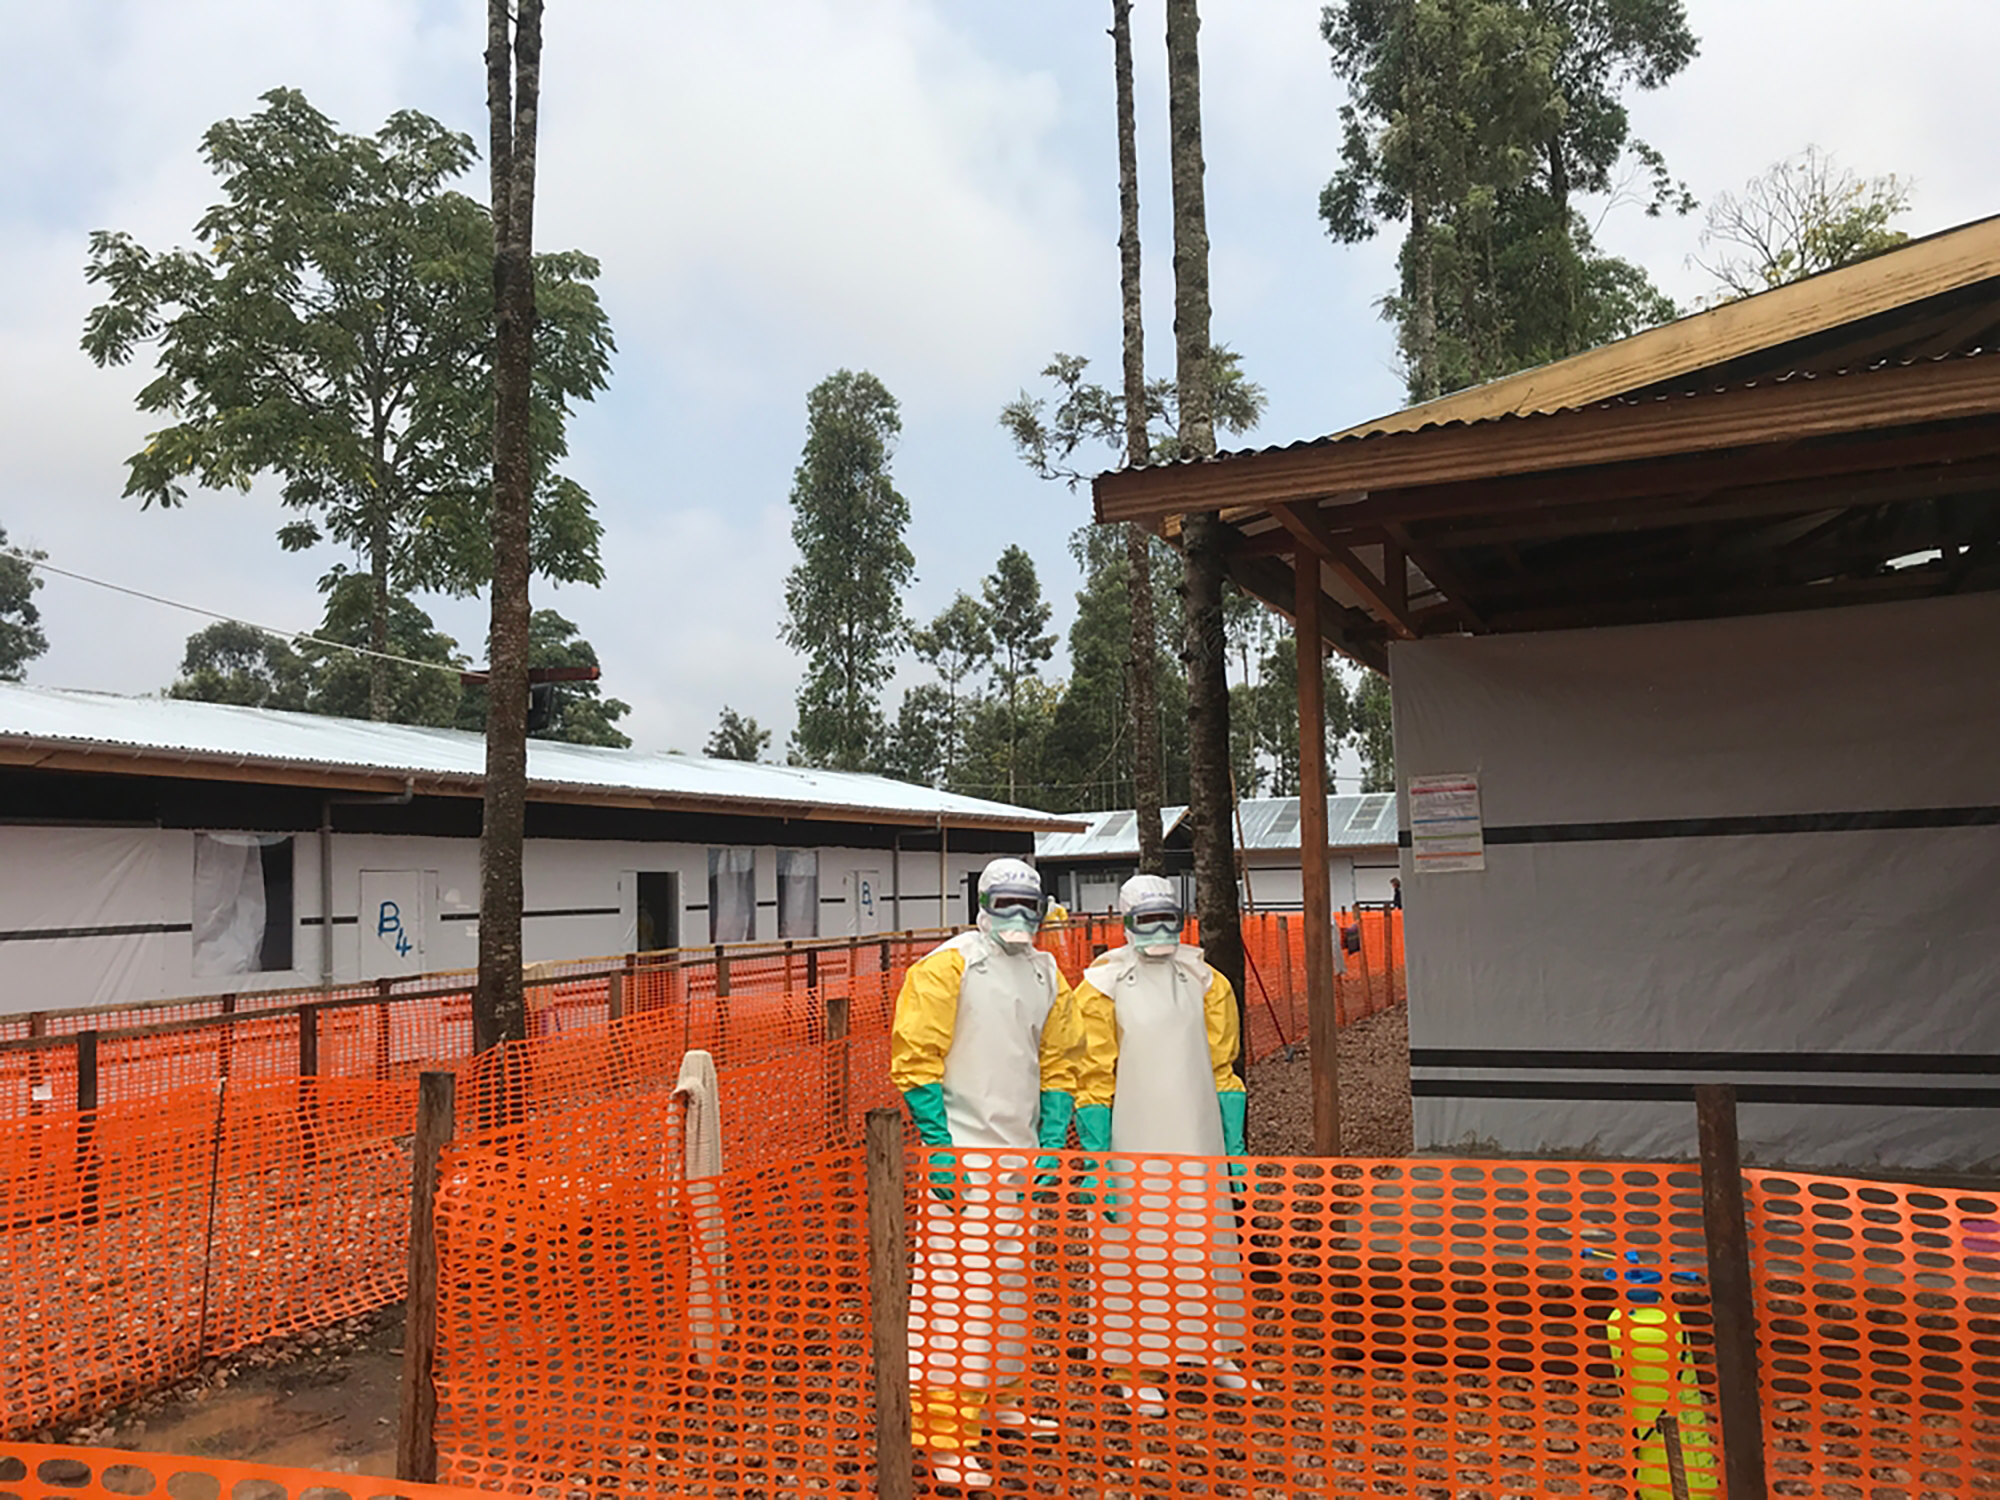 Two staff in full personal protective equipment wait for a person suspected of having Ebola at the newly-opened MSF Ebola Treatment Centre in Katwa, North Kivu province, Democratic Republic of Congo. © Lisa Veran/MSF 